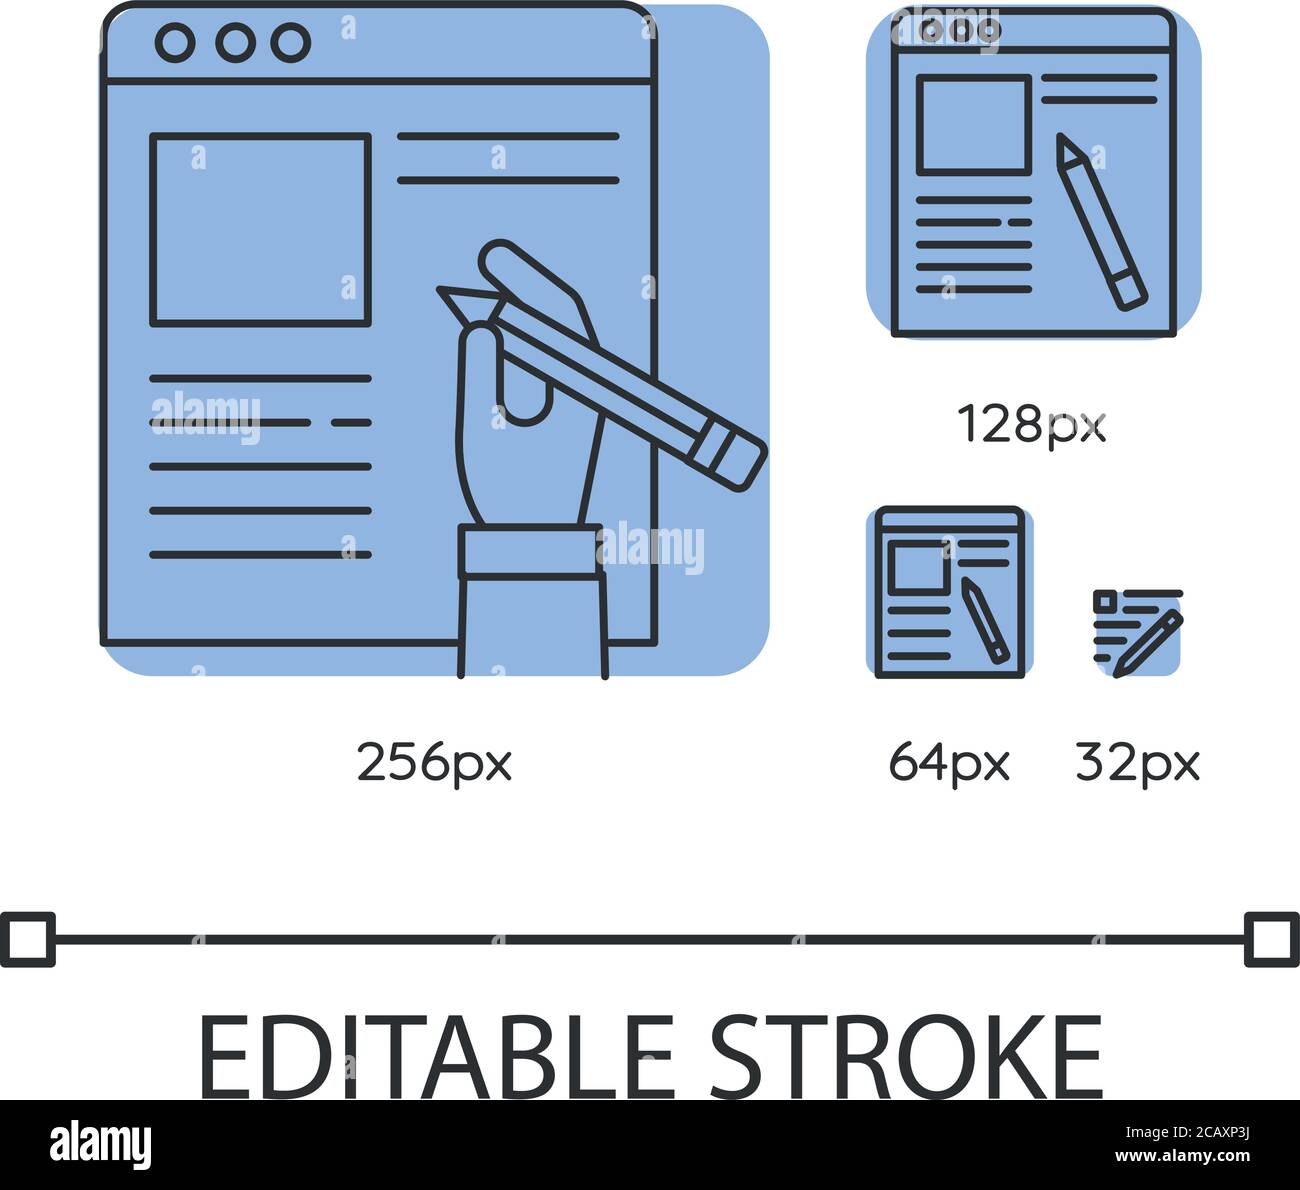 Copywriter, article author blue linear icons set. Essay writing and editing, journalism. Thin line customizable 256, 128, 64 and 32 px vector illustra Stock Vector